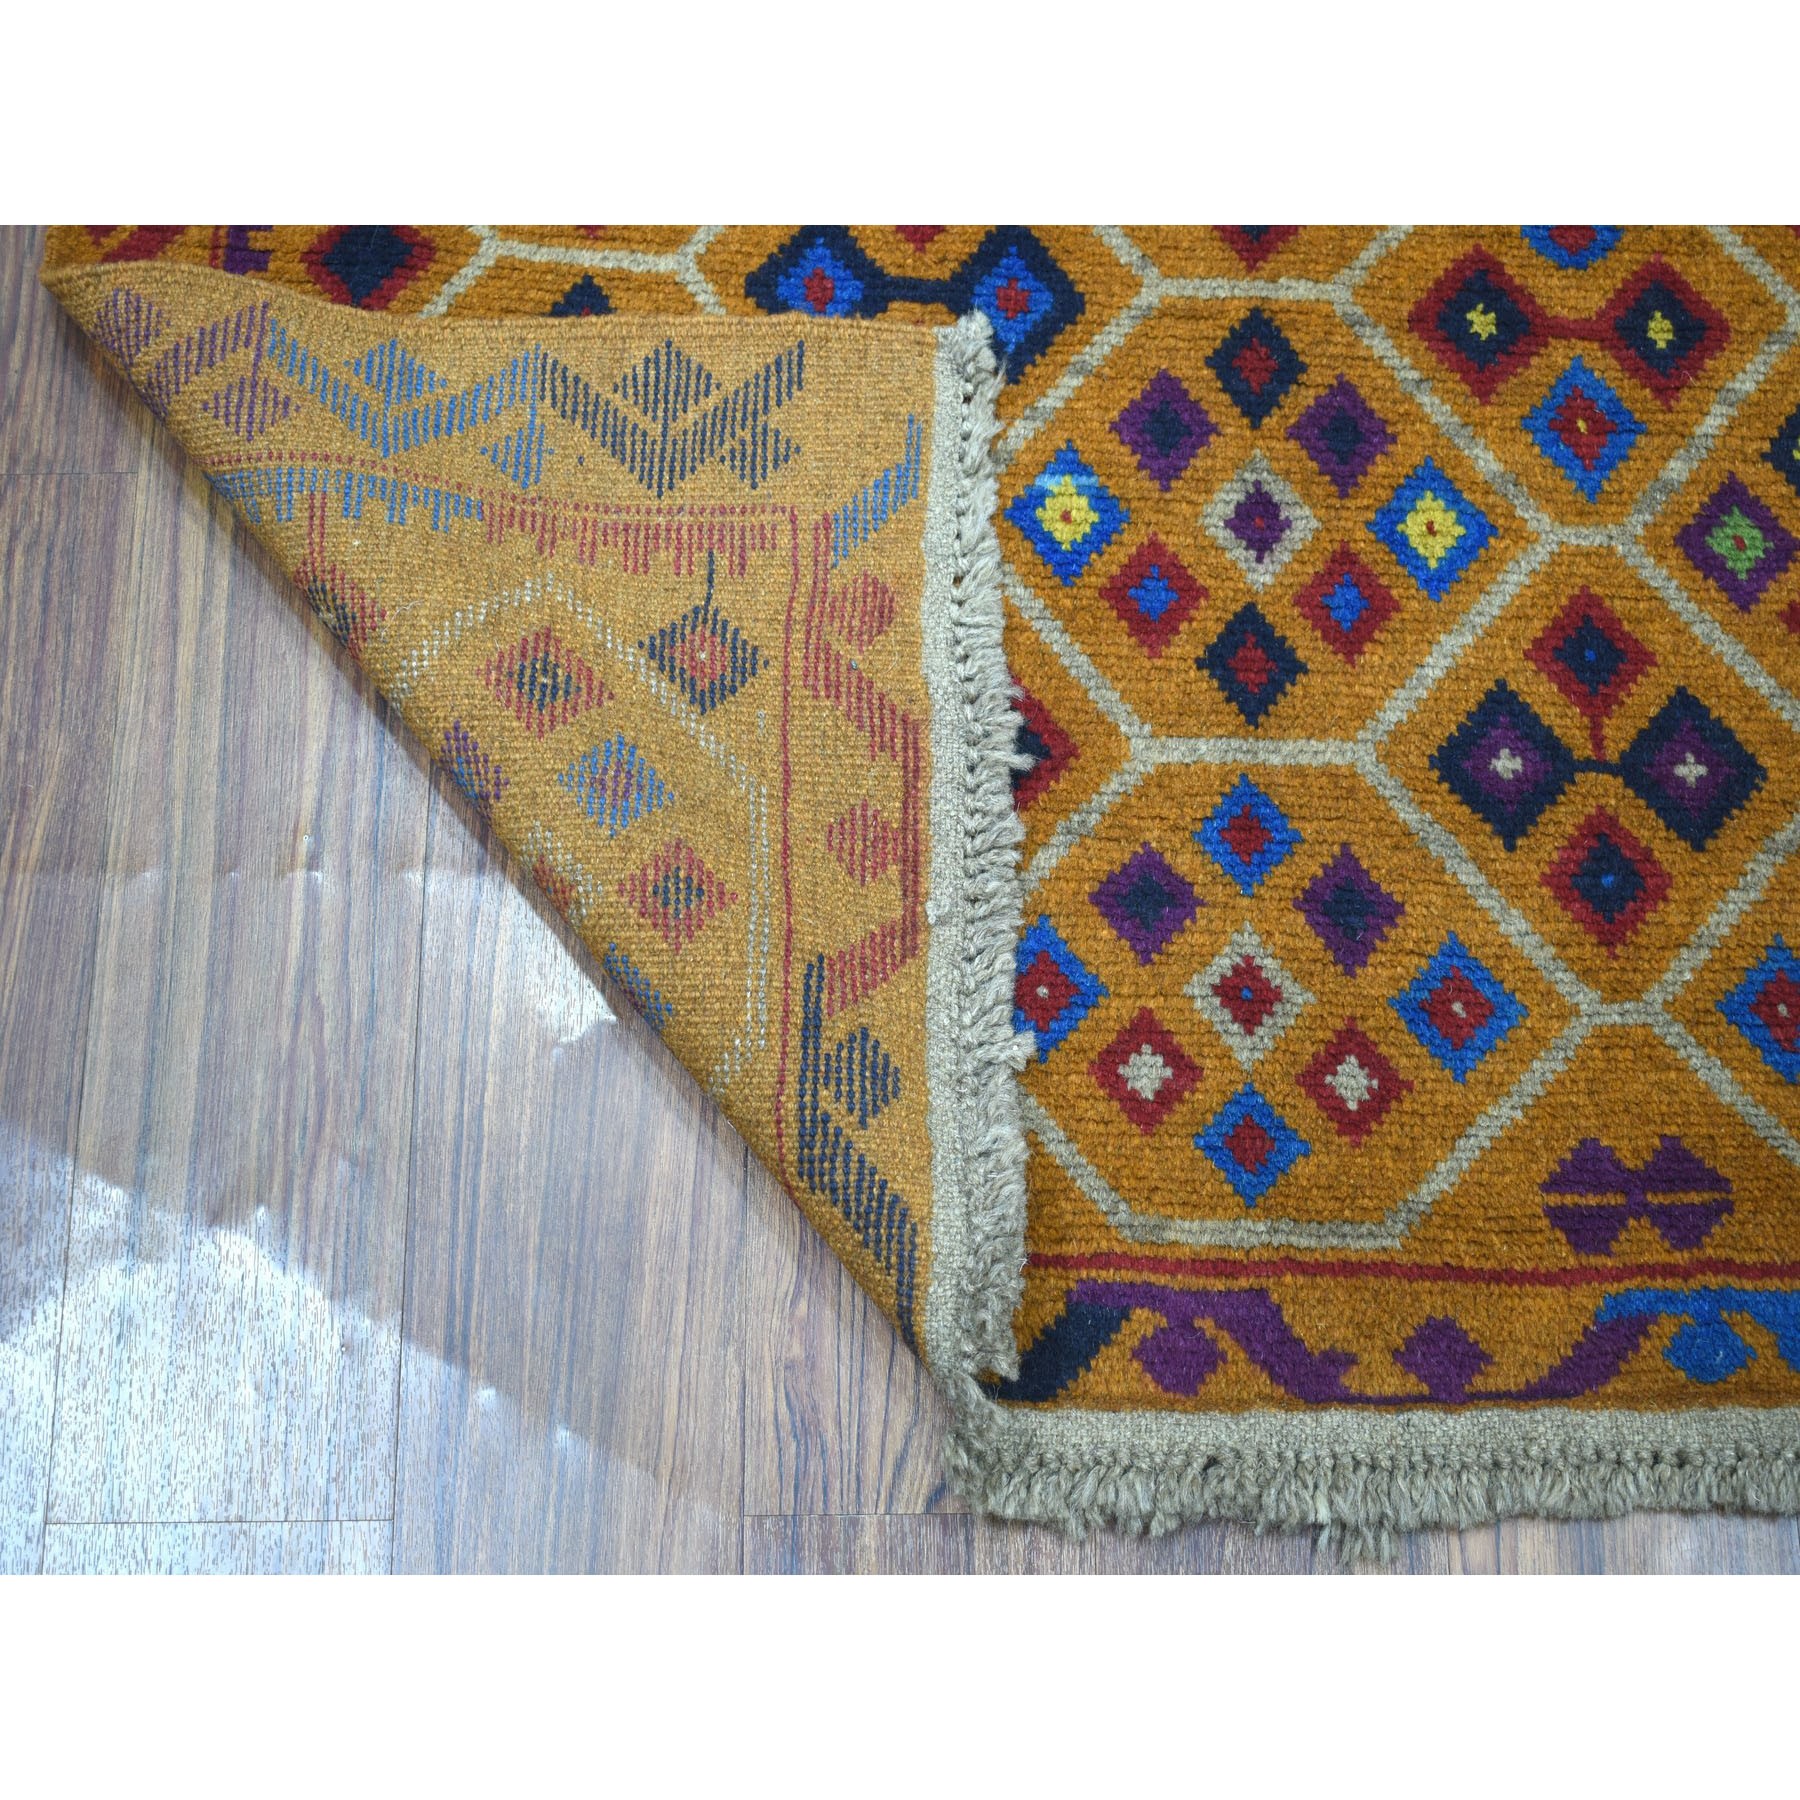 4'x5'10" Colorful Afghan Baluch Tribal Design Hand Woven 100% Wool Oriental Rug 